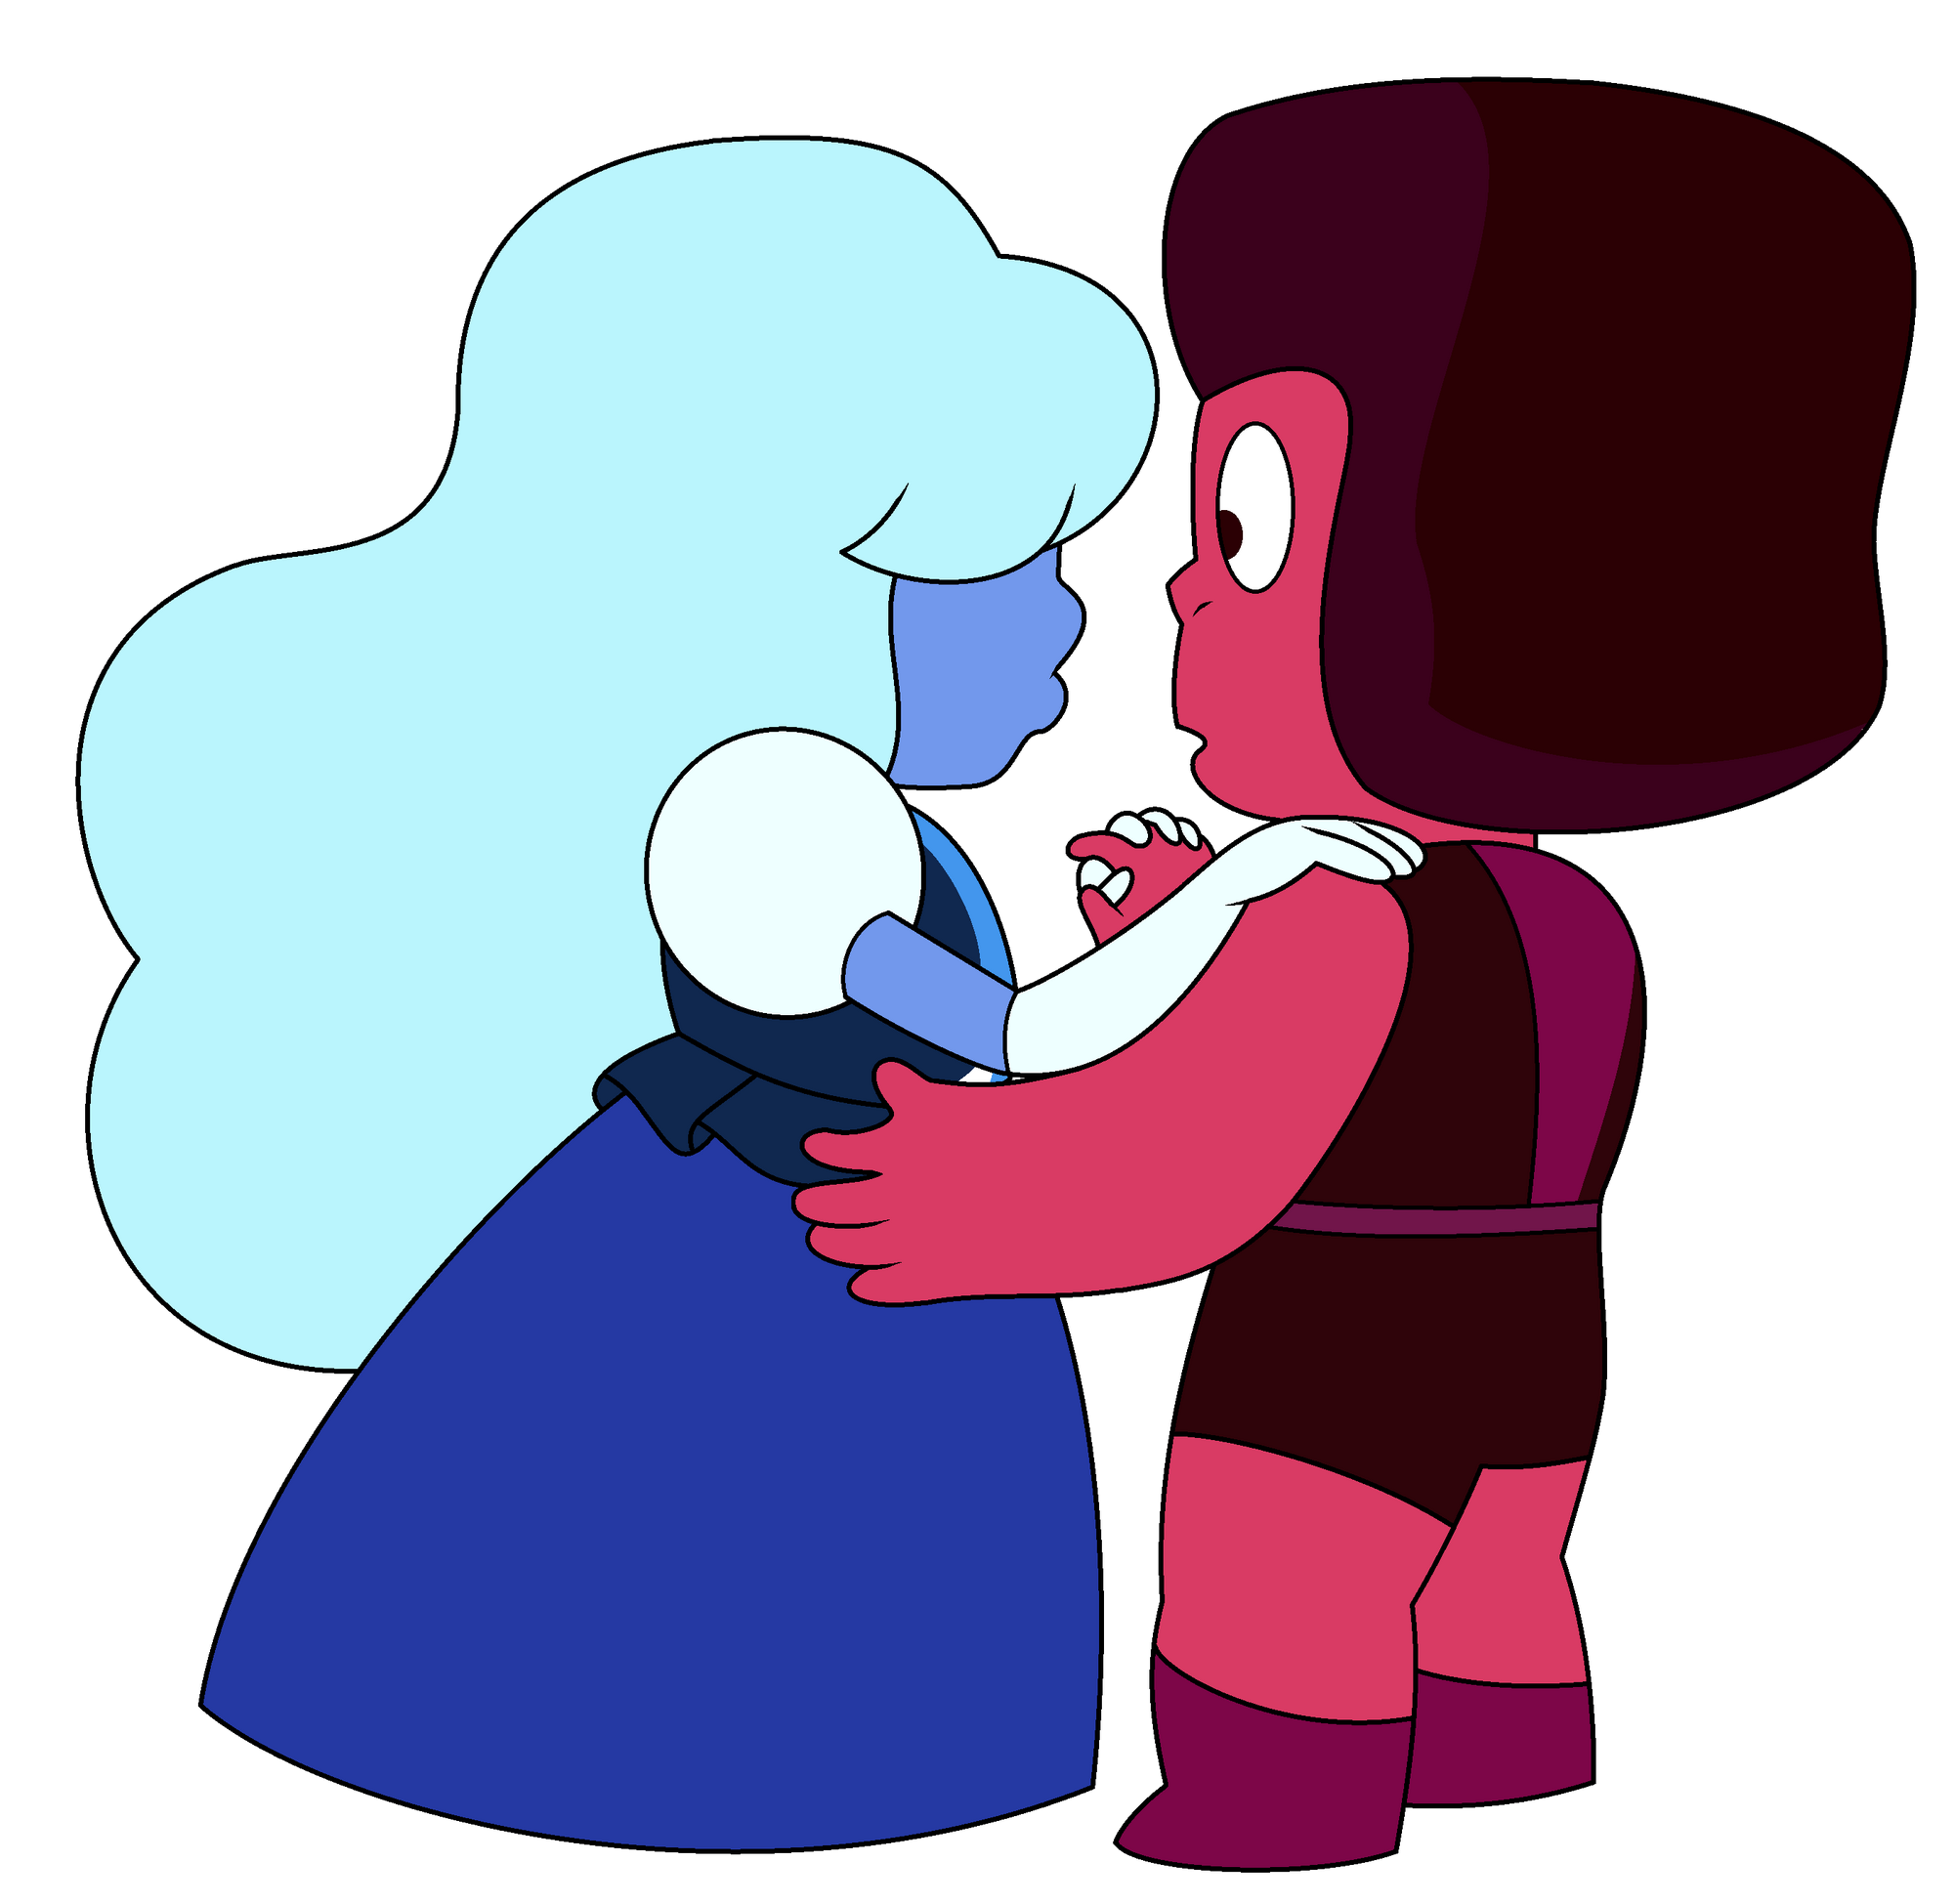 Image Ruby And Sapphire Fusion Dancepng Steven Universe Wiki 